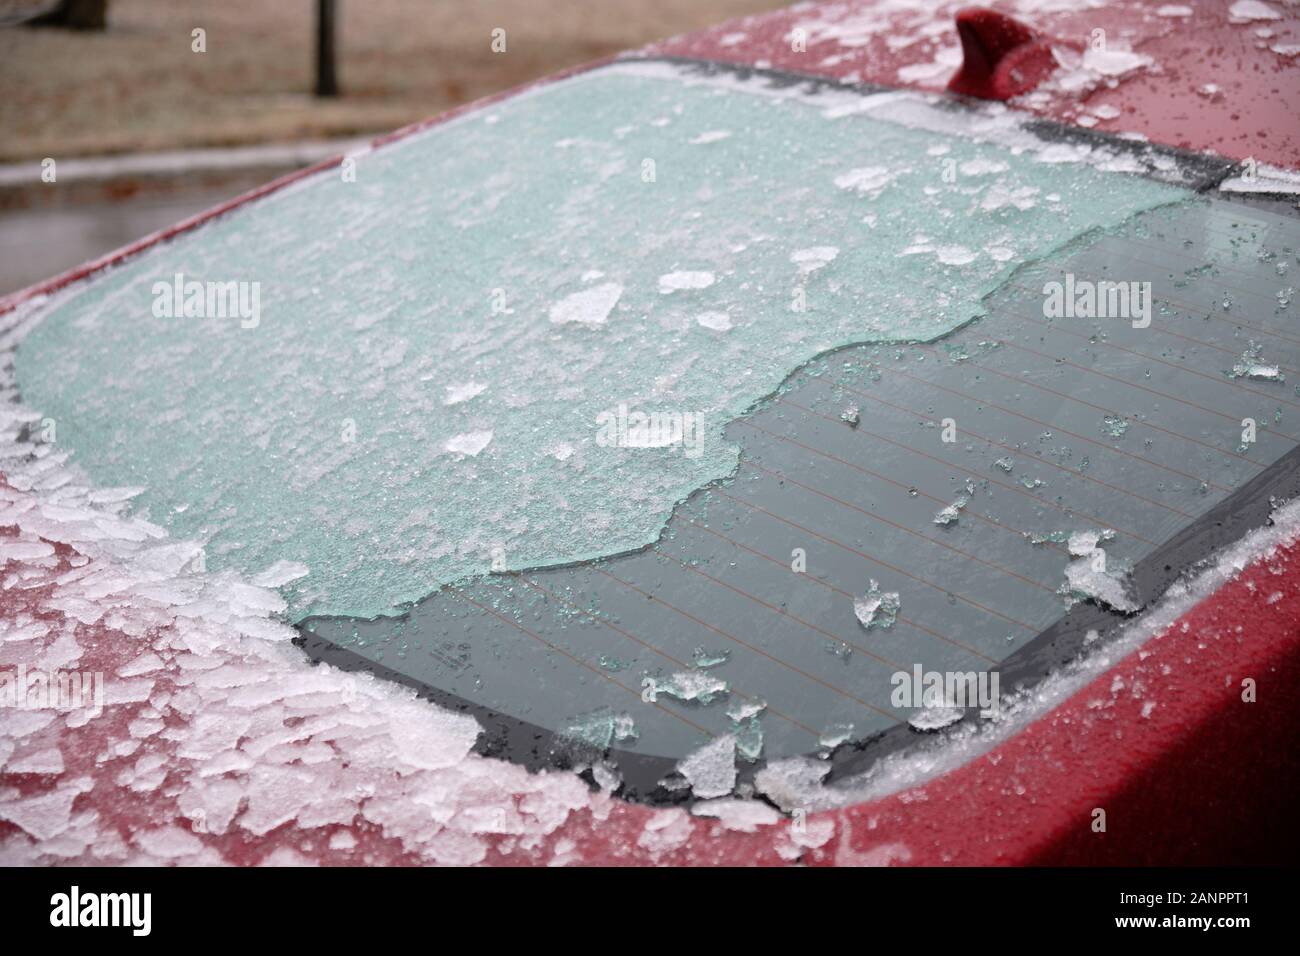 Car windshield covered in ice falling freezing rain storm partially scrapped Stock Photo